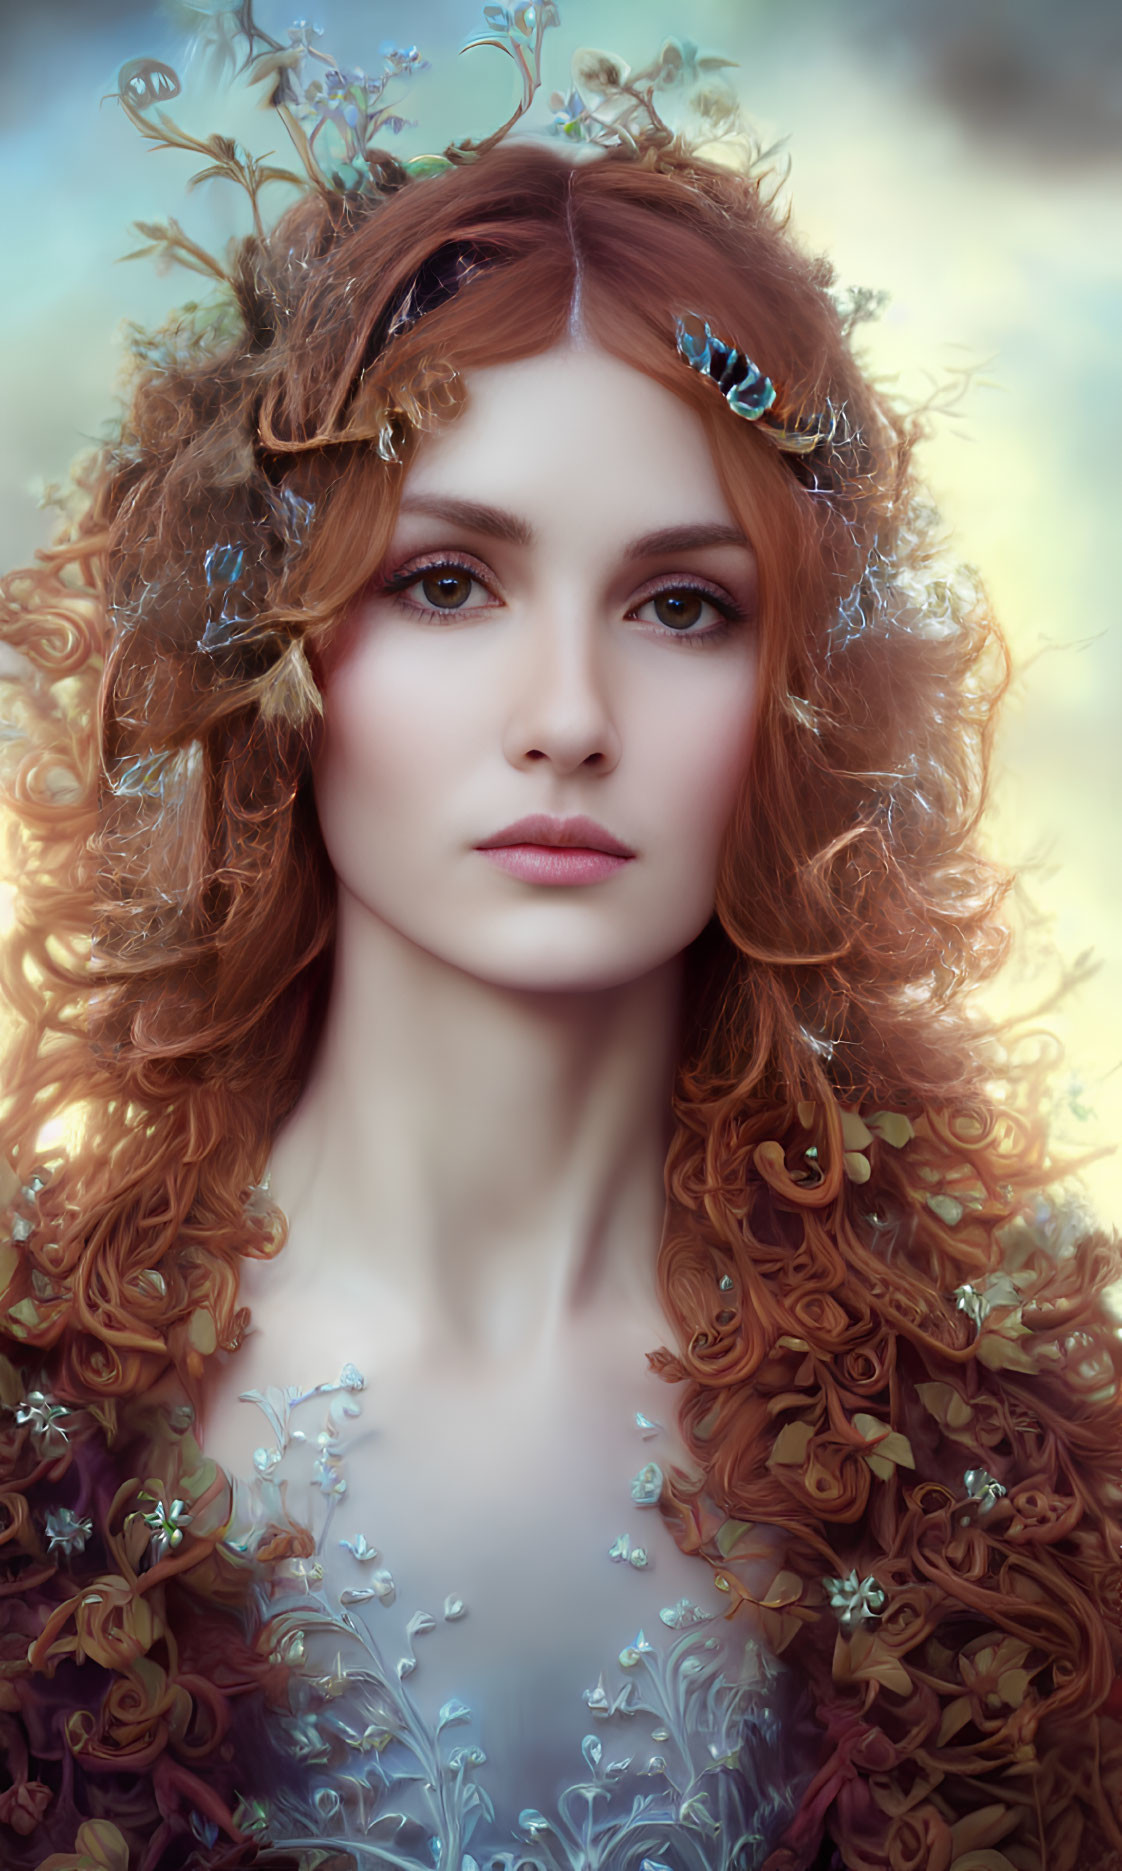 Curly Red-Haired Woman with Floral Adornments in Ethereal Setting